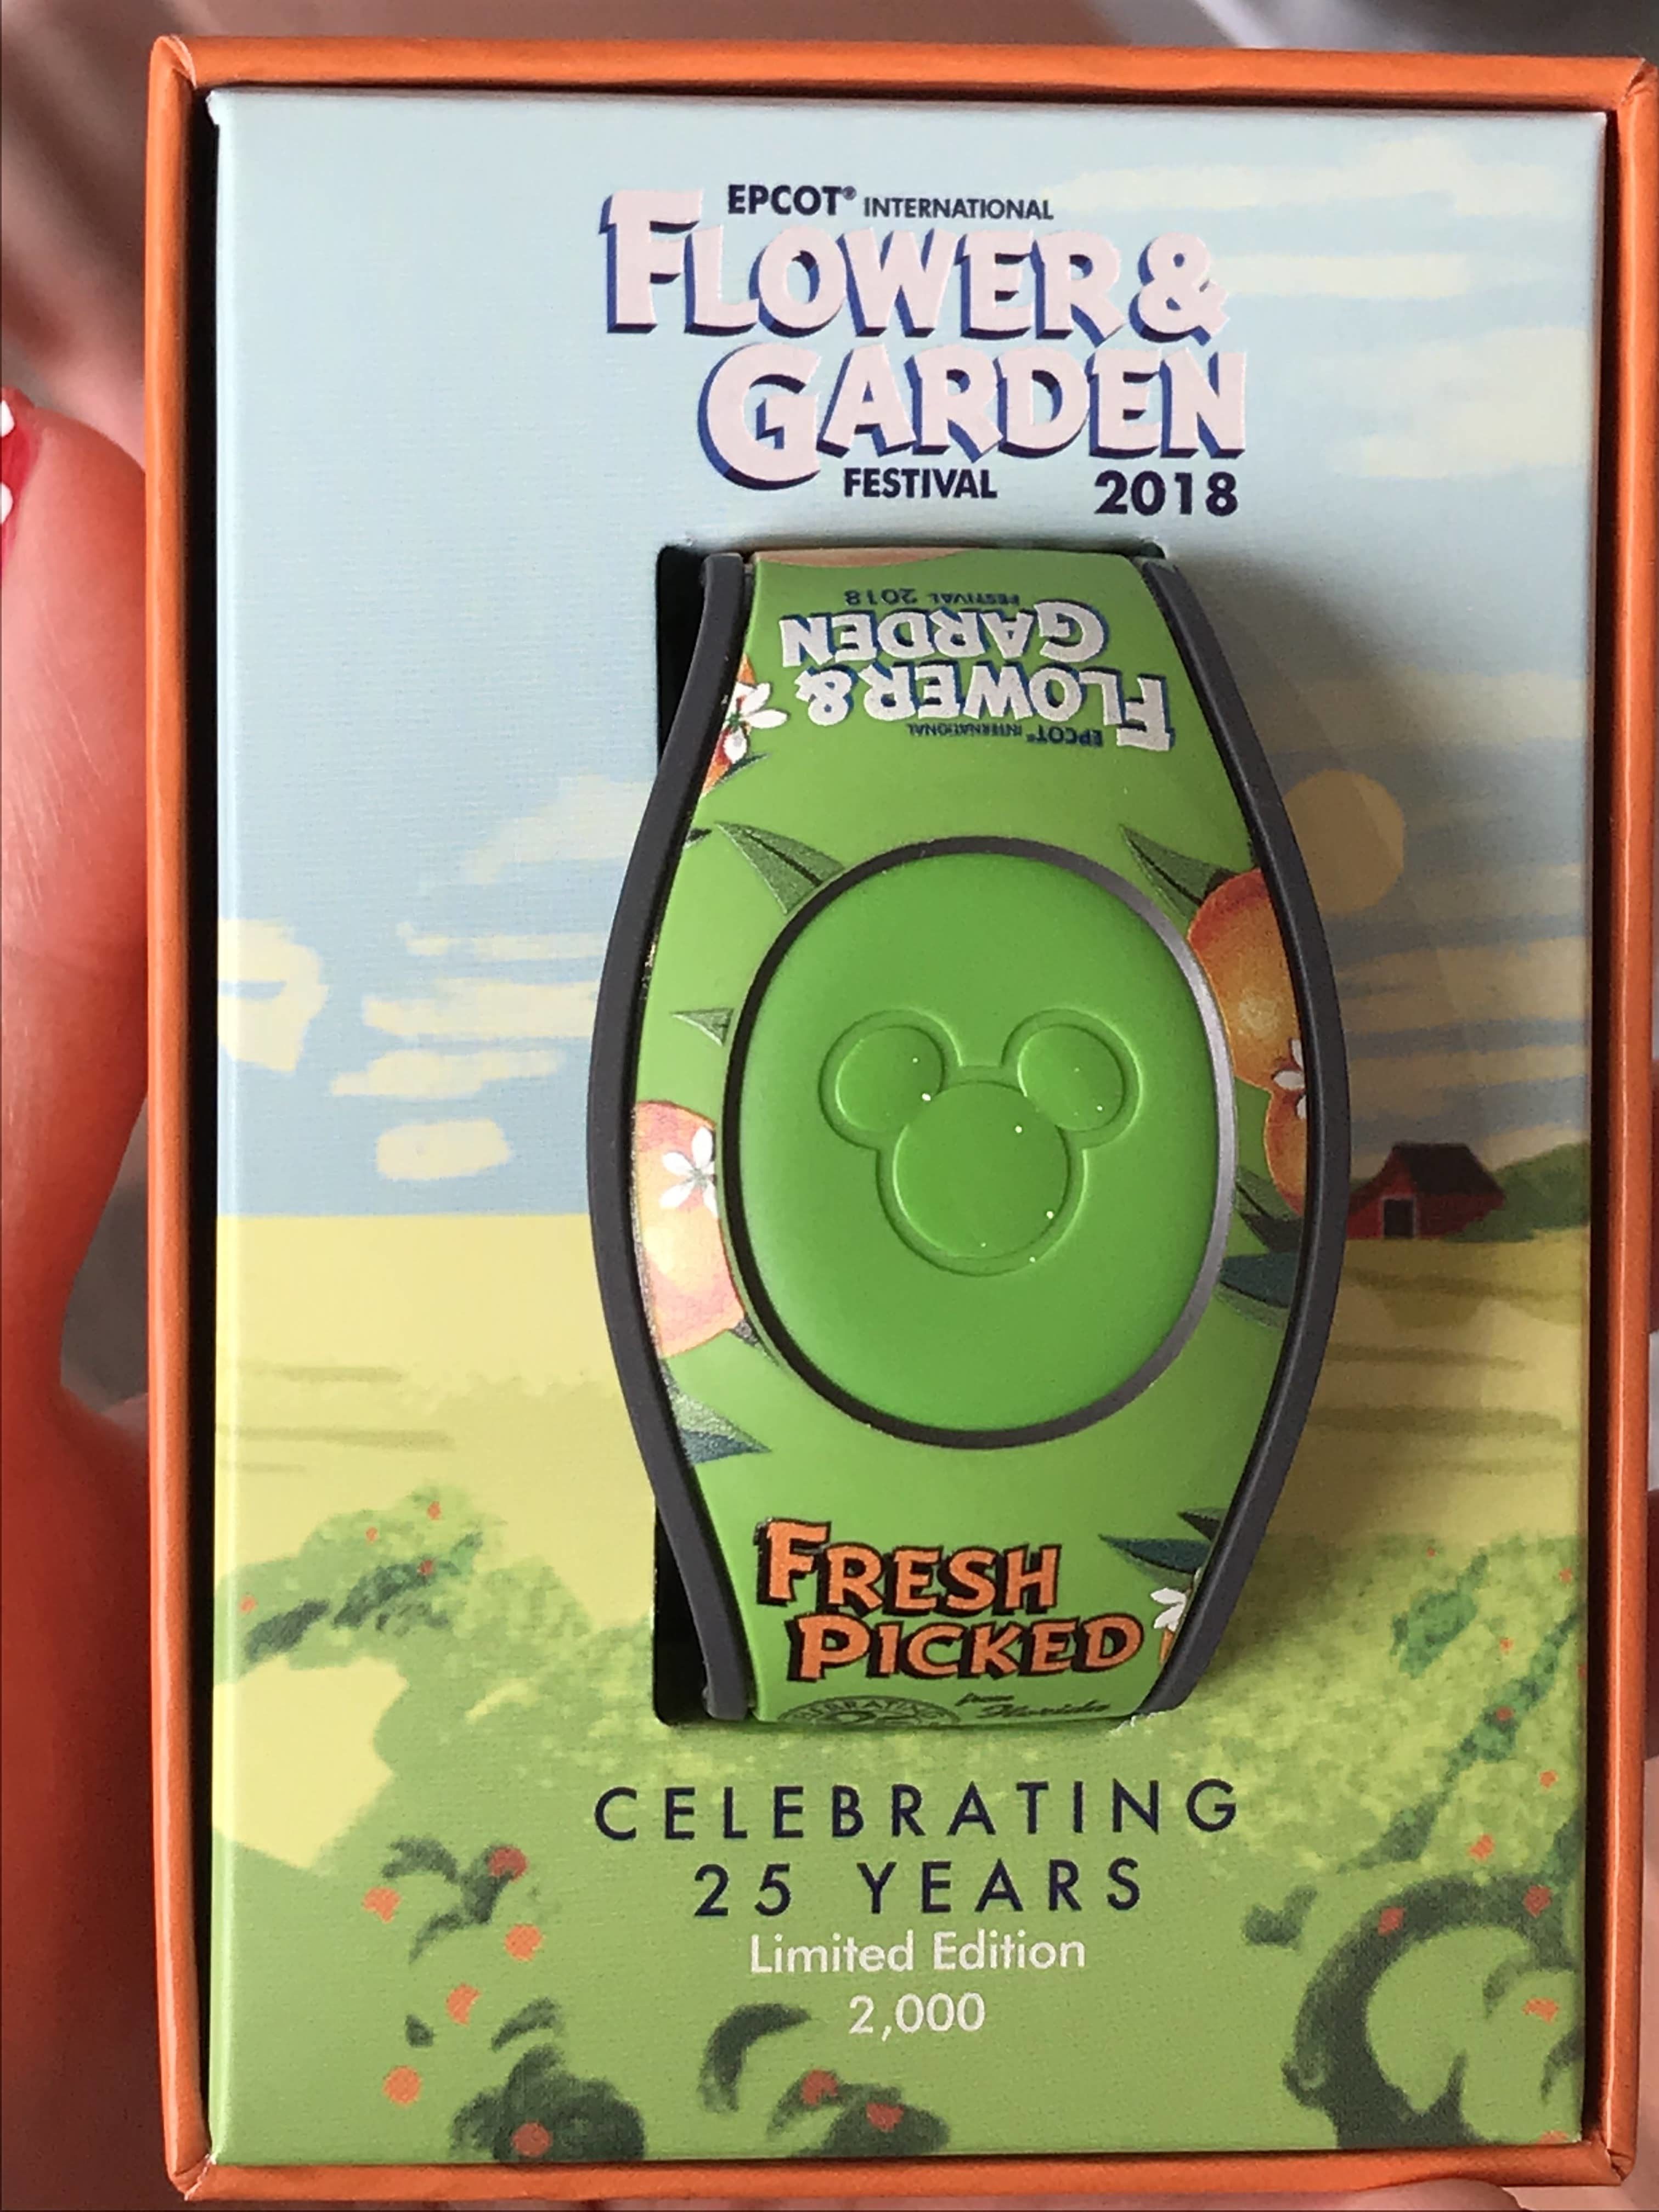 Flower and Garden 2018 Magicband